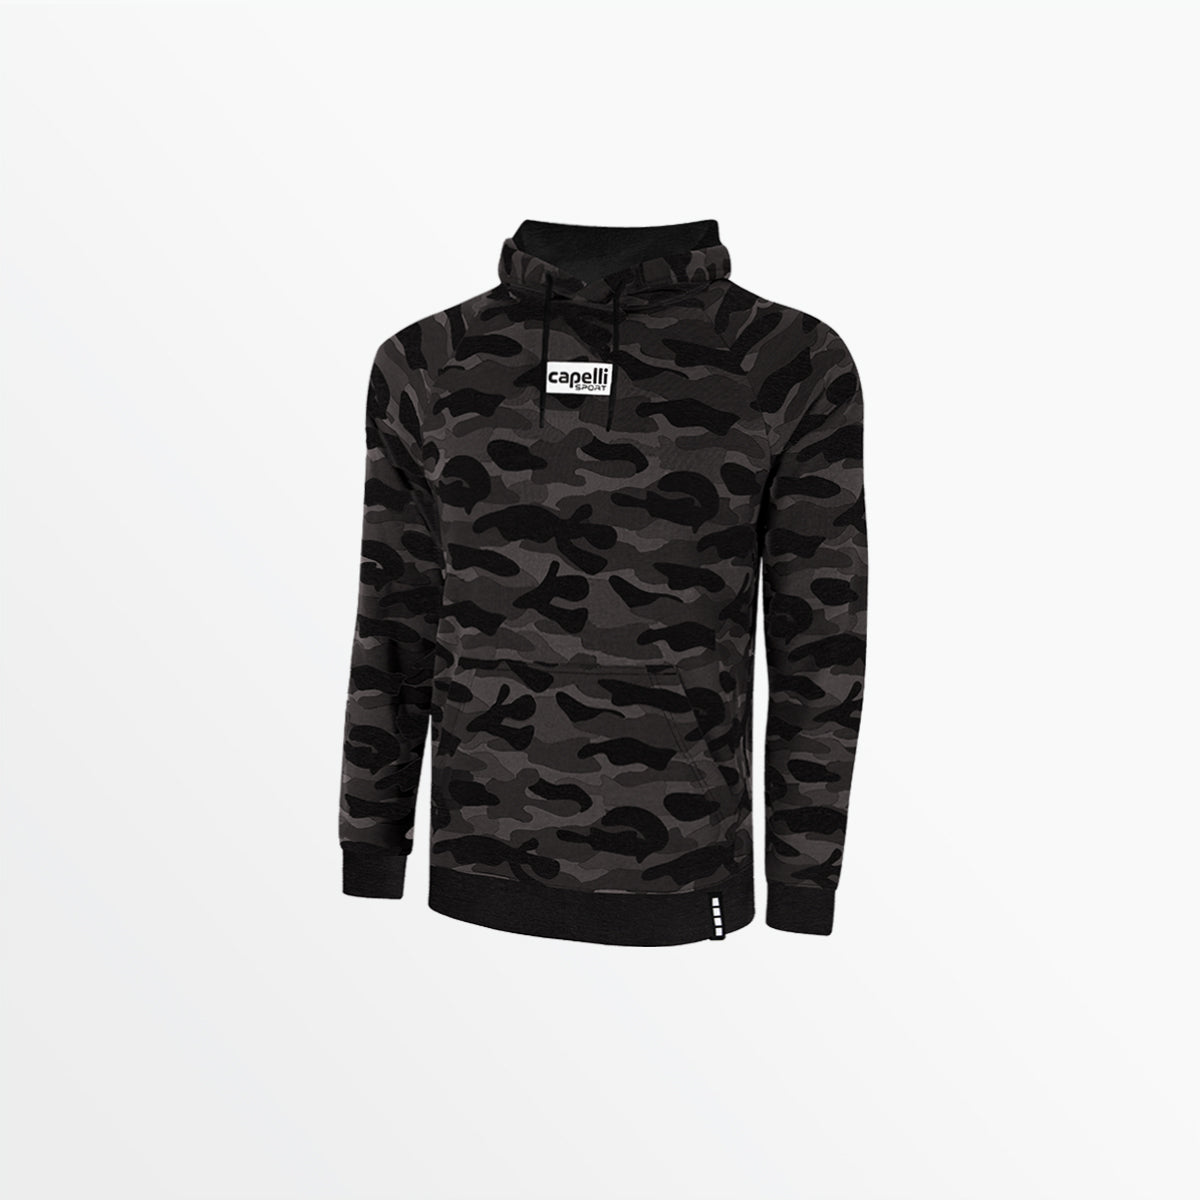 MEN'S FRENCH TERRY CAMO PRINT PULLOVER HOODIE